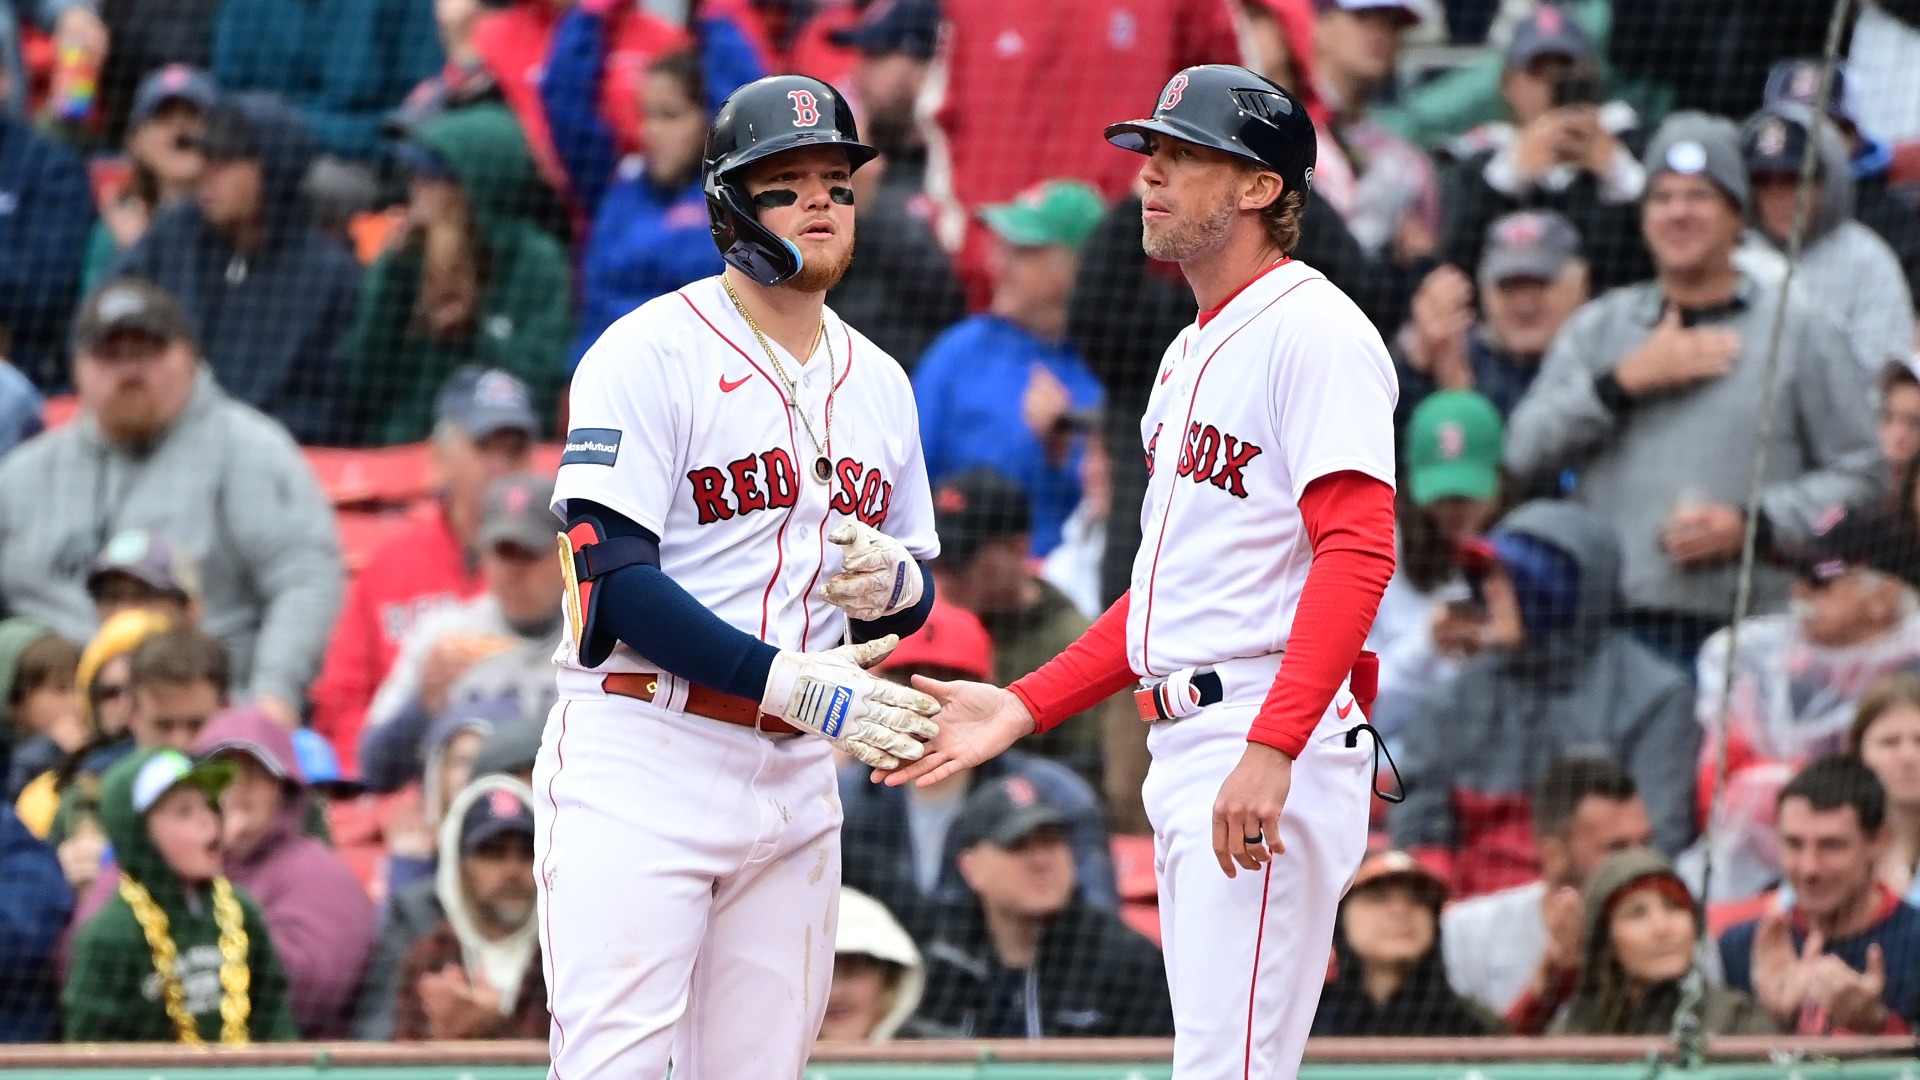 Red Sox Vs. Rays Lineups: Boston Looks For Doubleheader Sweep